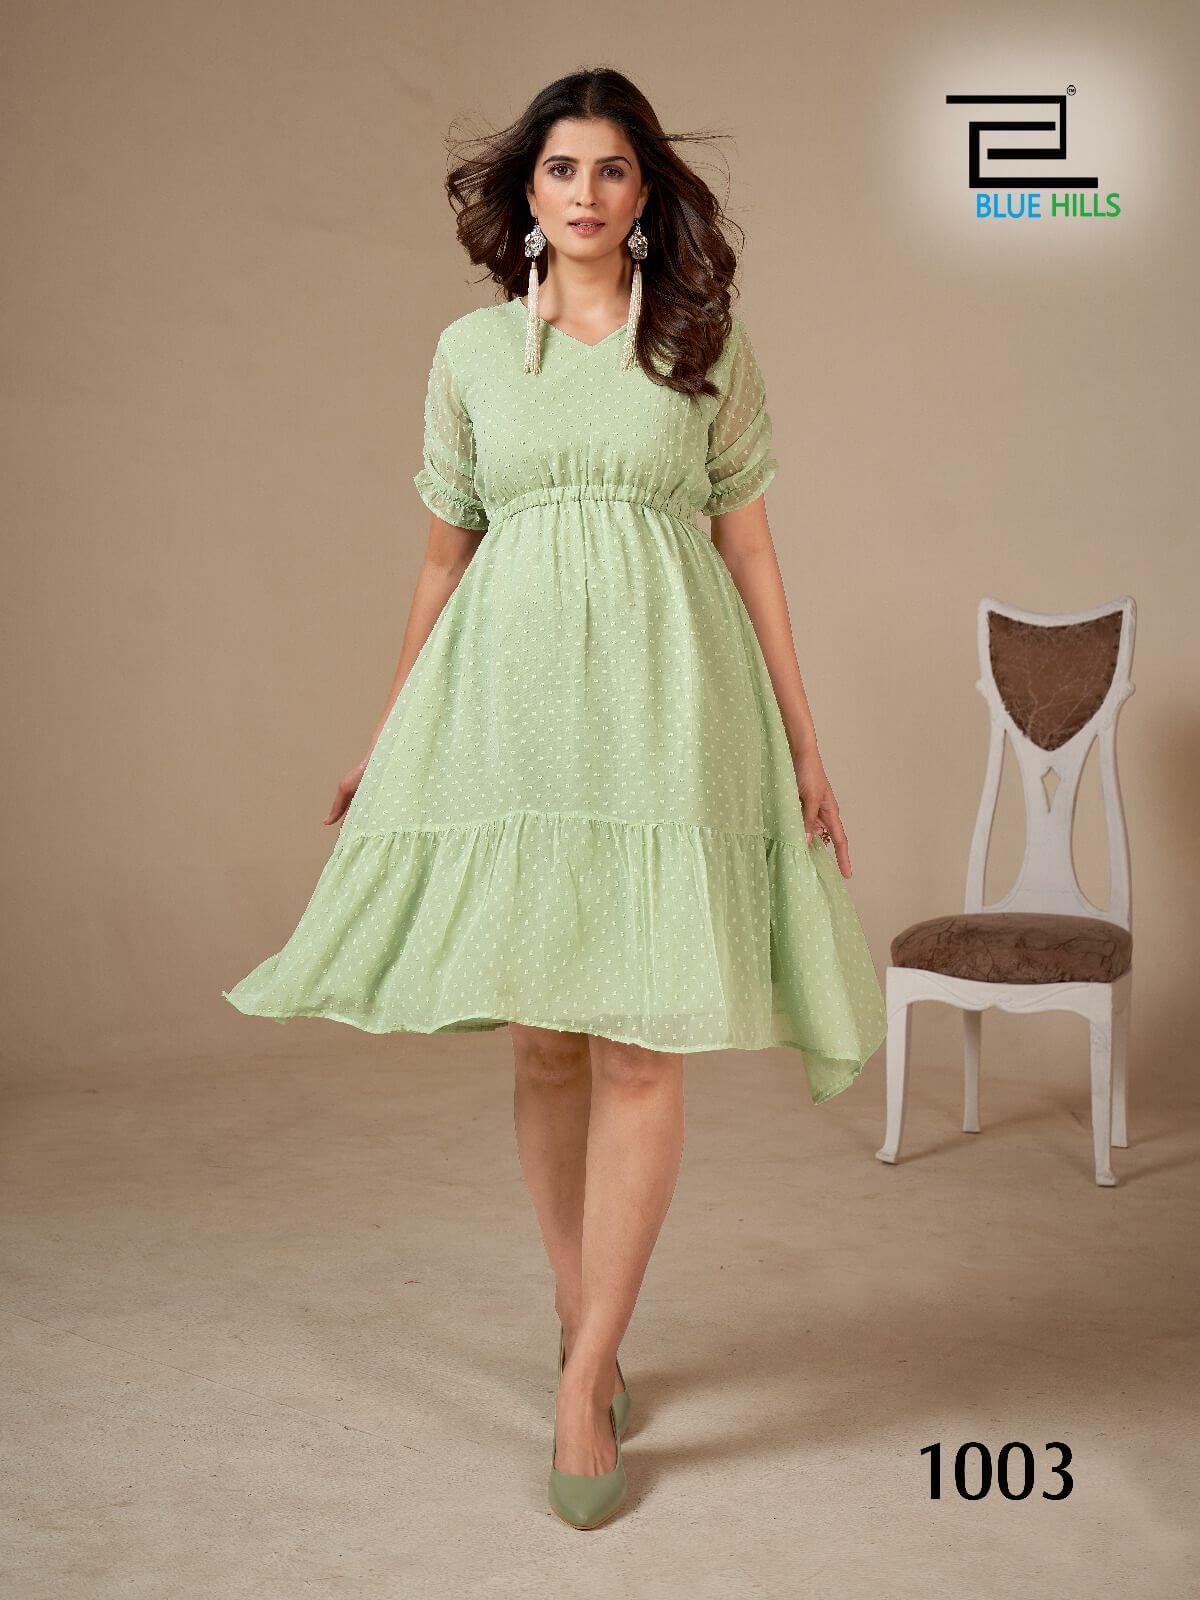 Blue Hills Charming One Piece Dress Catalog collection 7